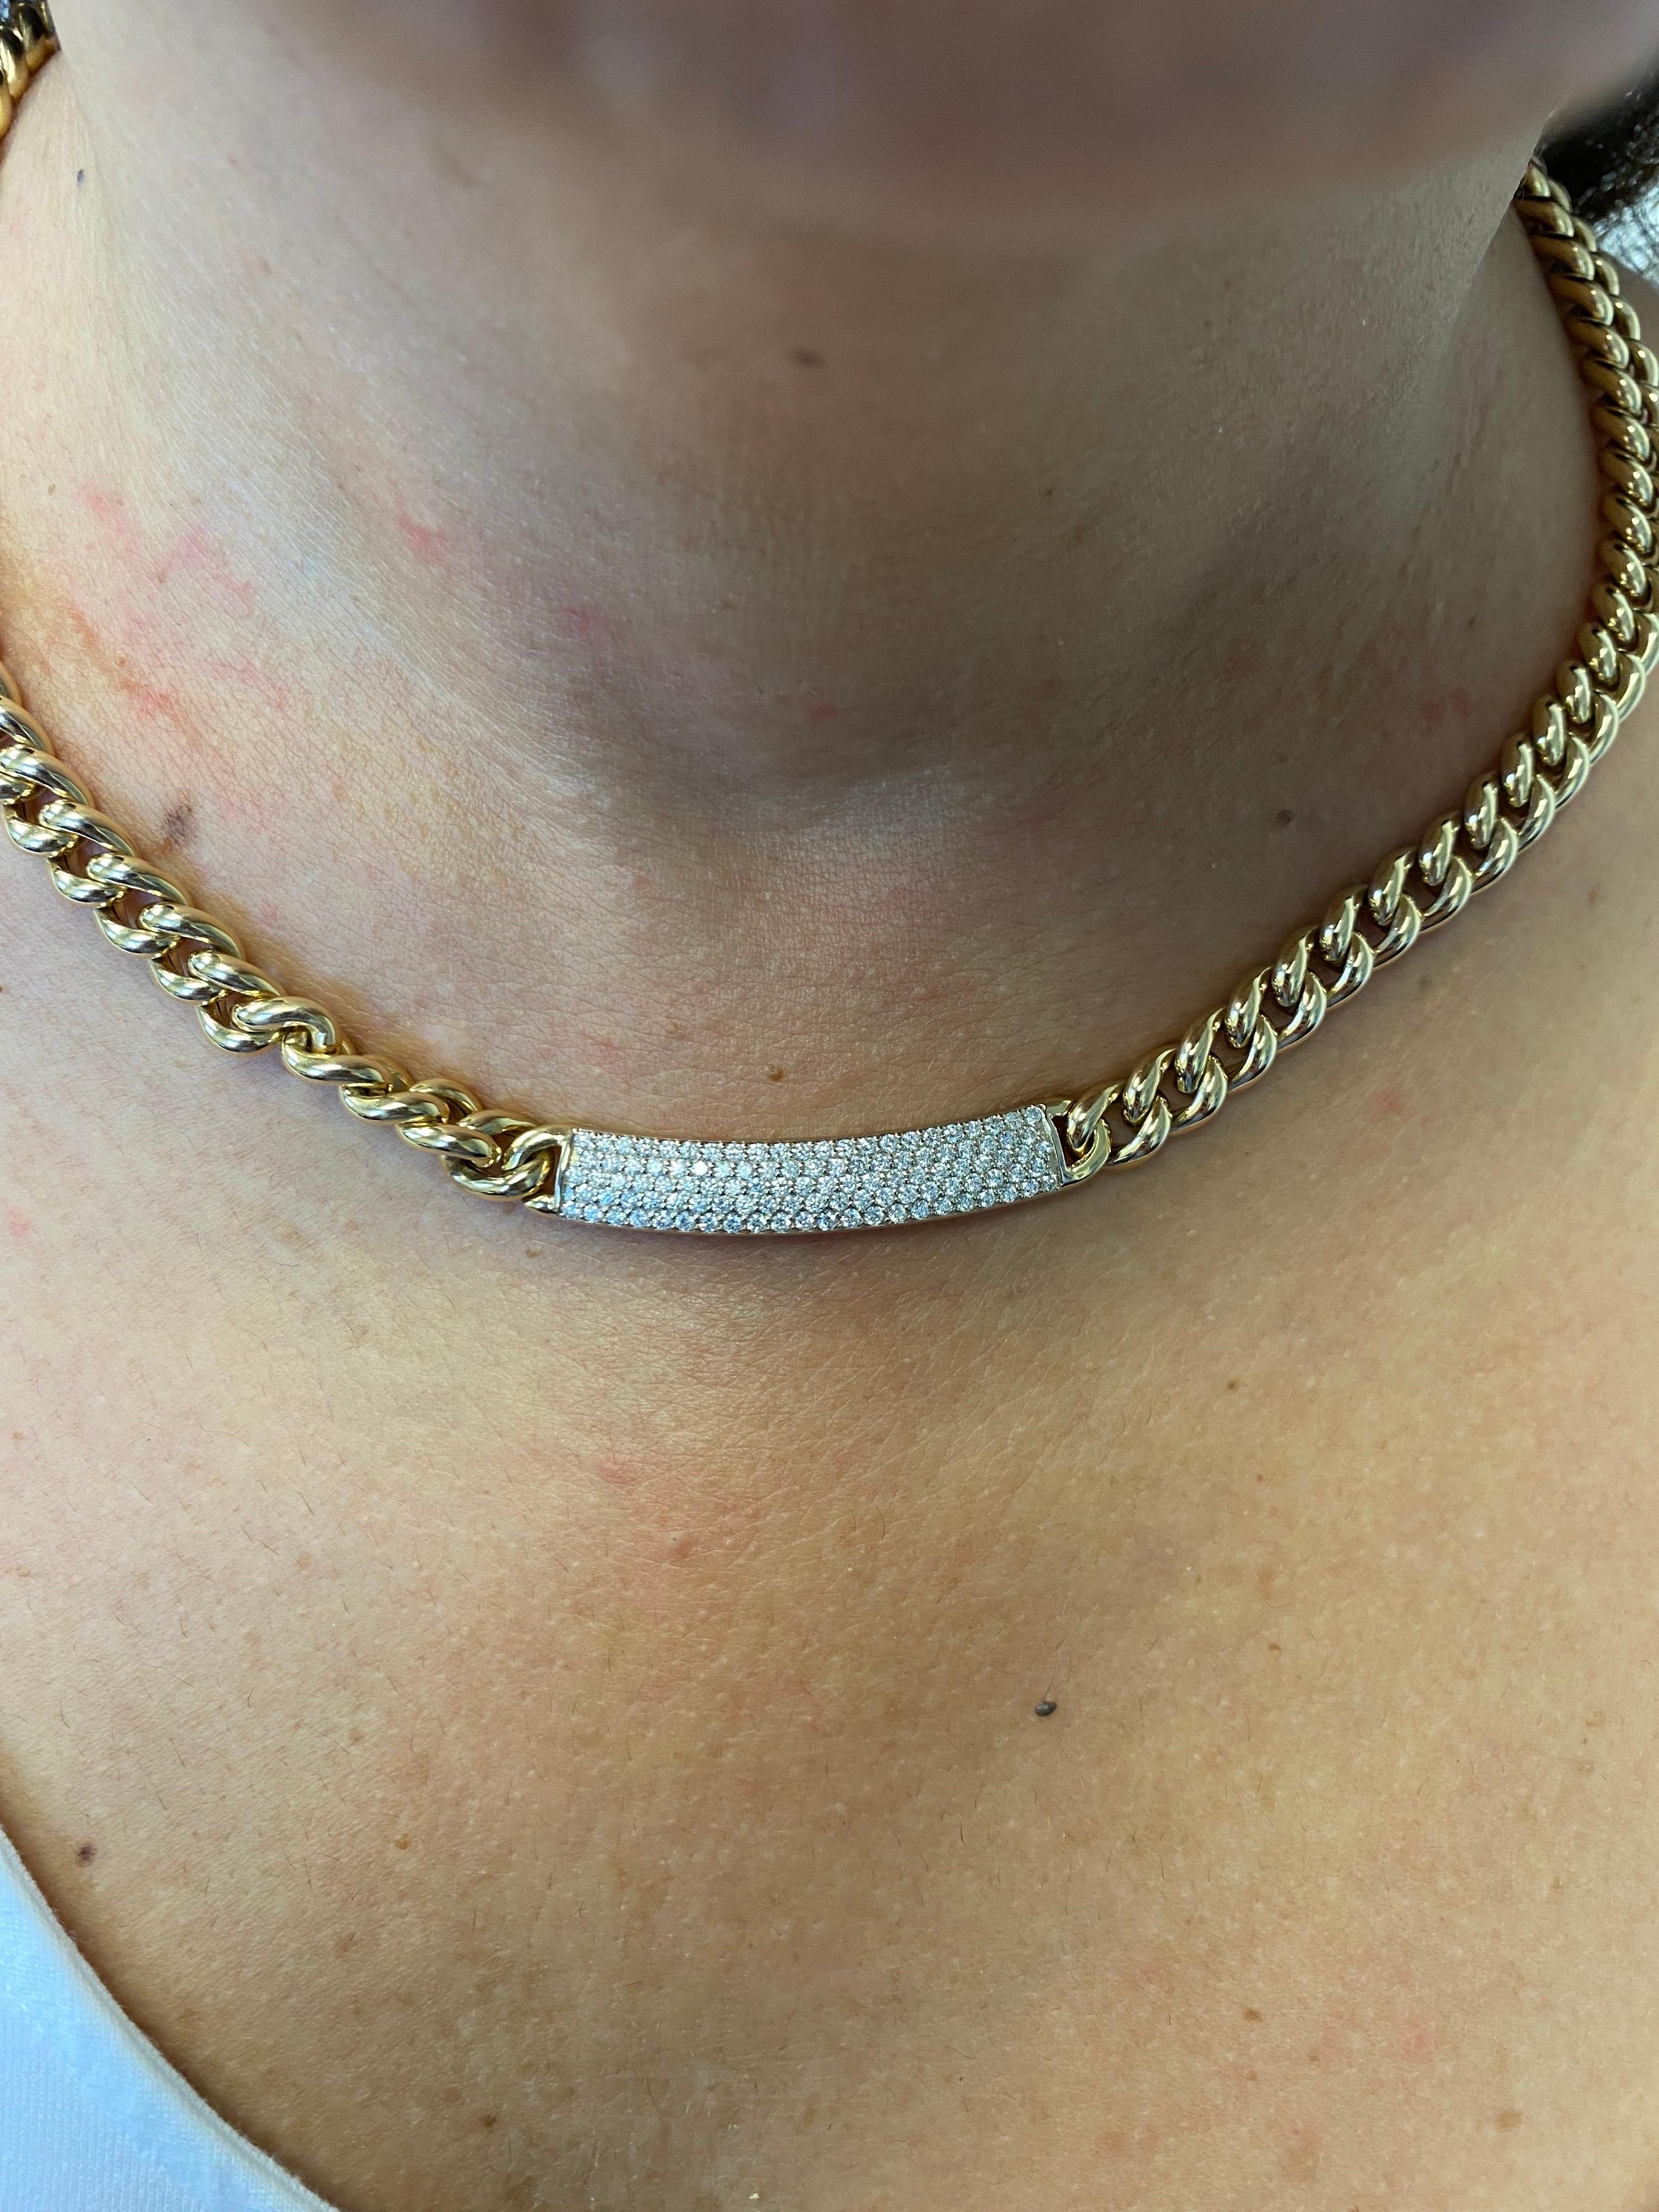 Italian Diamond necklace set in 18K yellow gold. The necklace is set in a Cuban chain link. The diamonds are set in a pave' and the total weight is 2.32 carats. The stones are G color, and the clarity is SI1. The necklace is 16 inches in length.